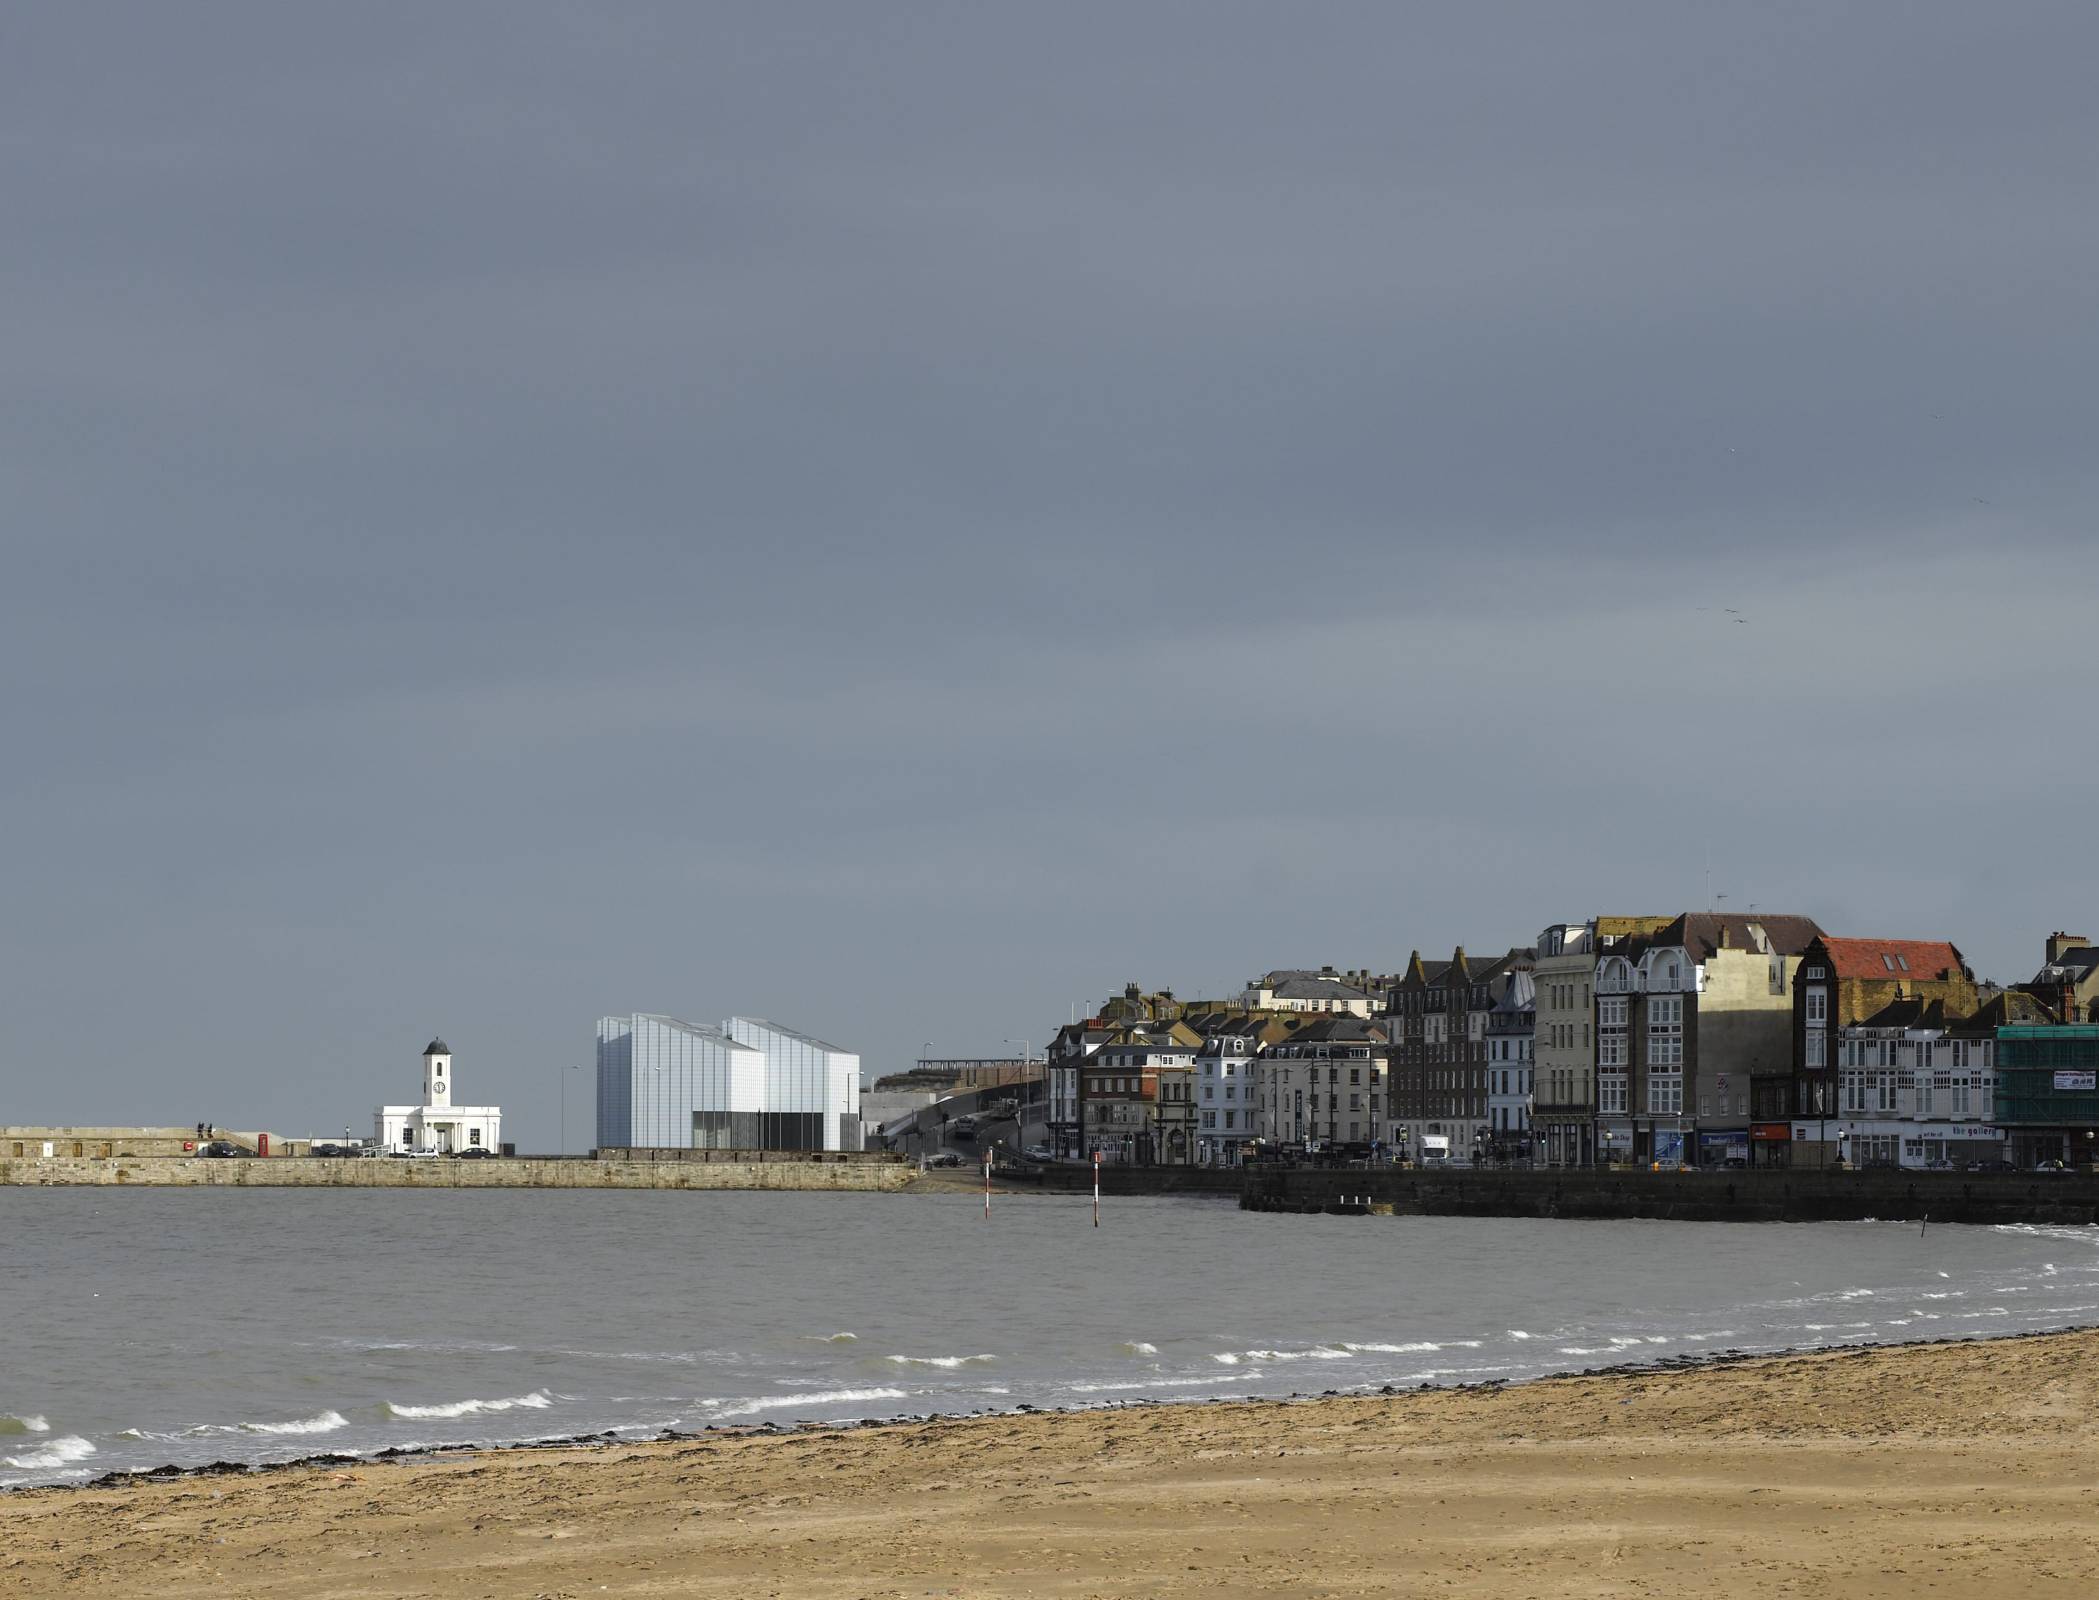 Turner Contemporary, Margate.